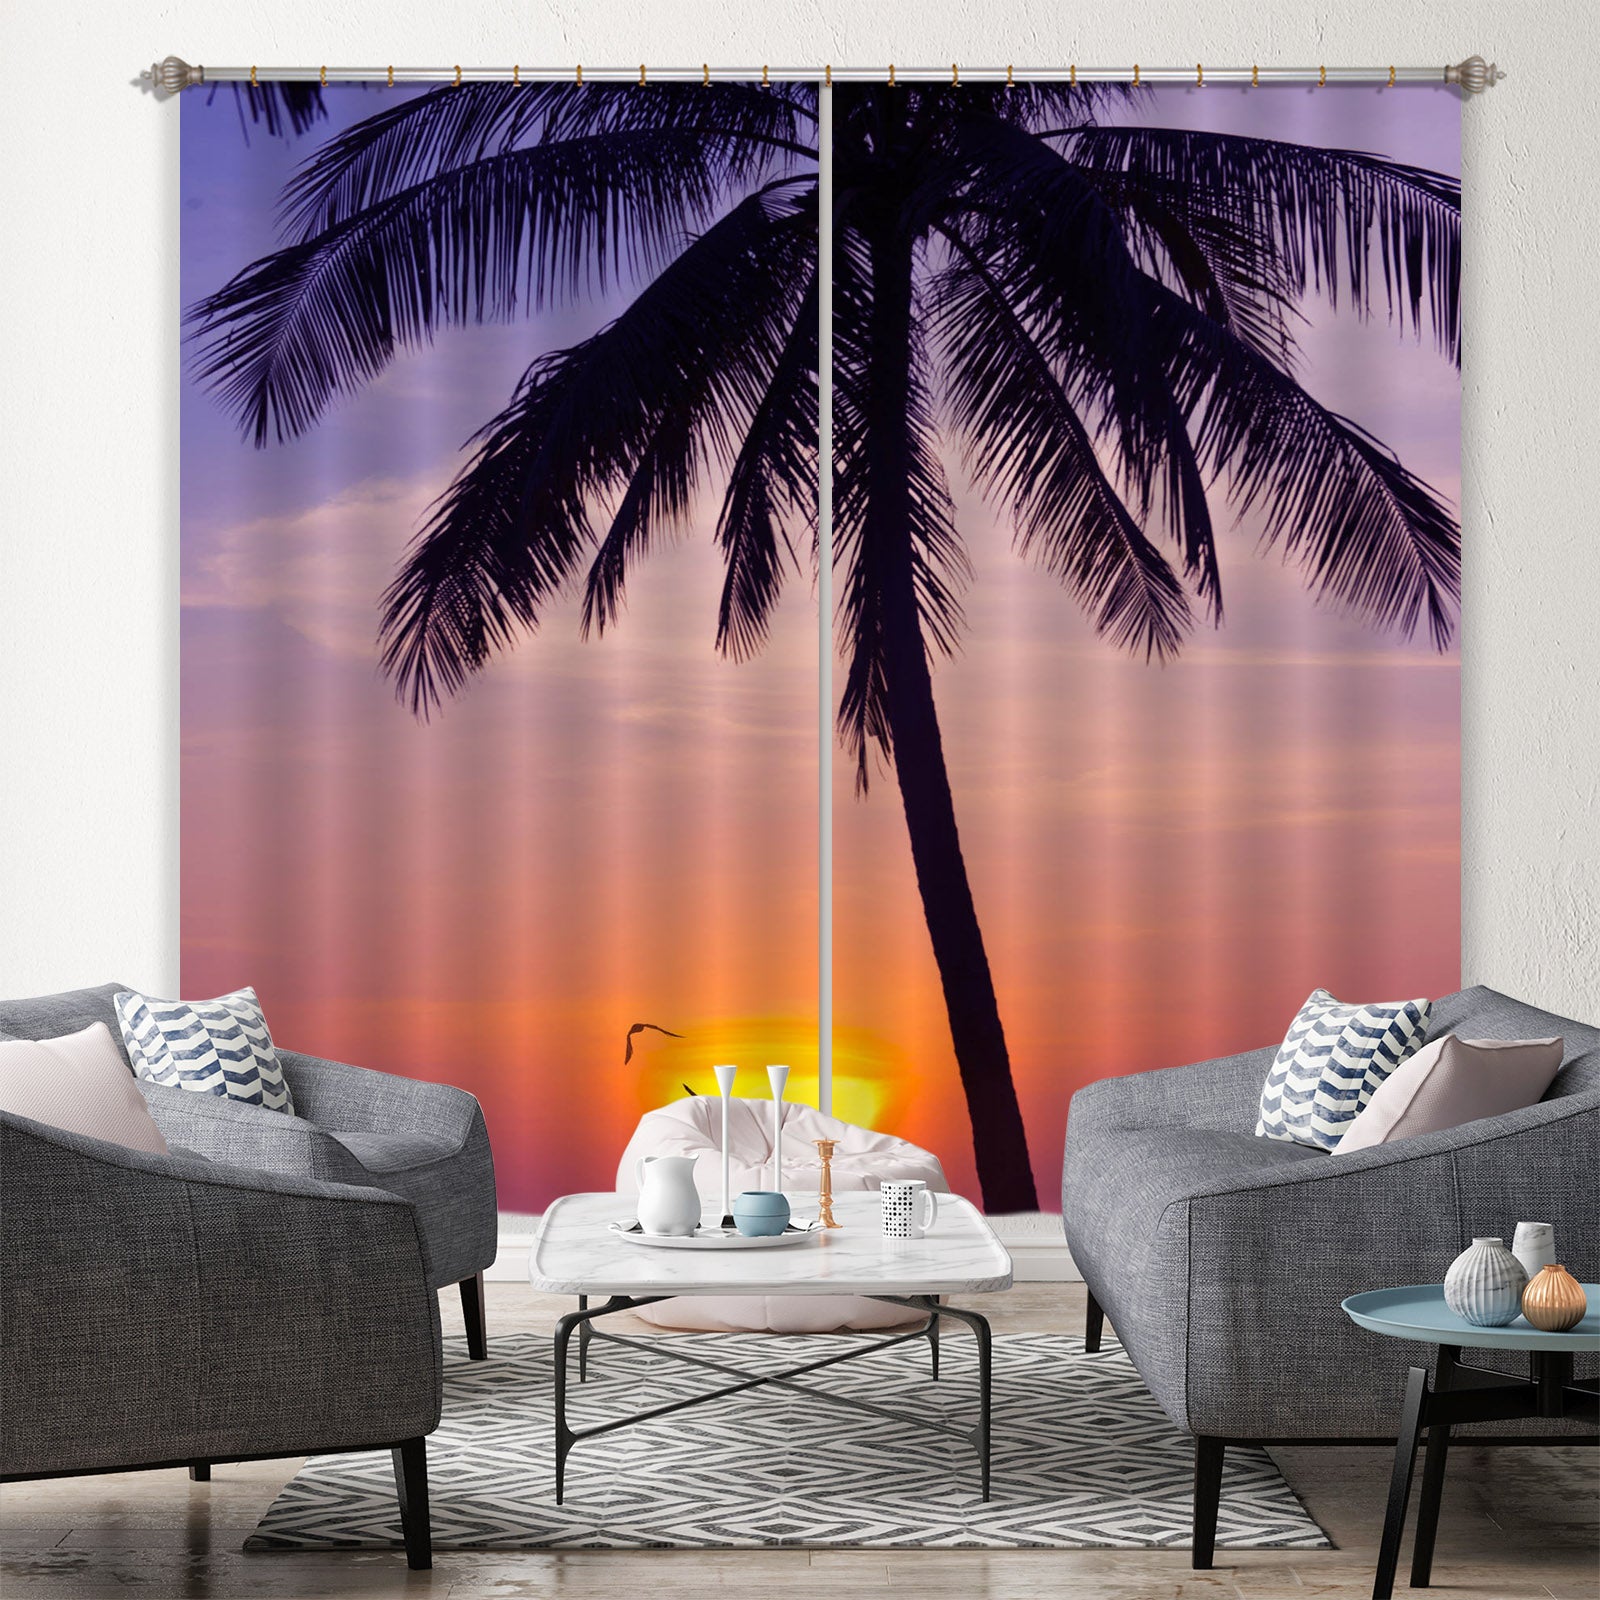 3D Sunset Coconut Tree 161 Marco Carmassi Curtain Curtains Drapes